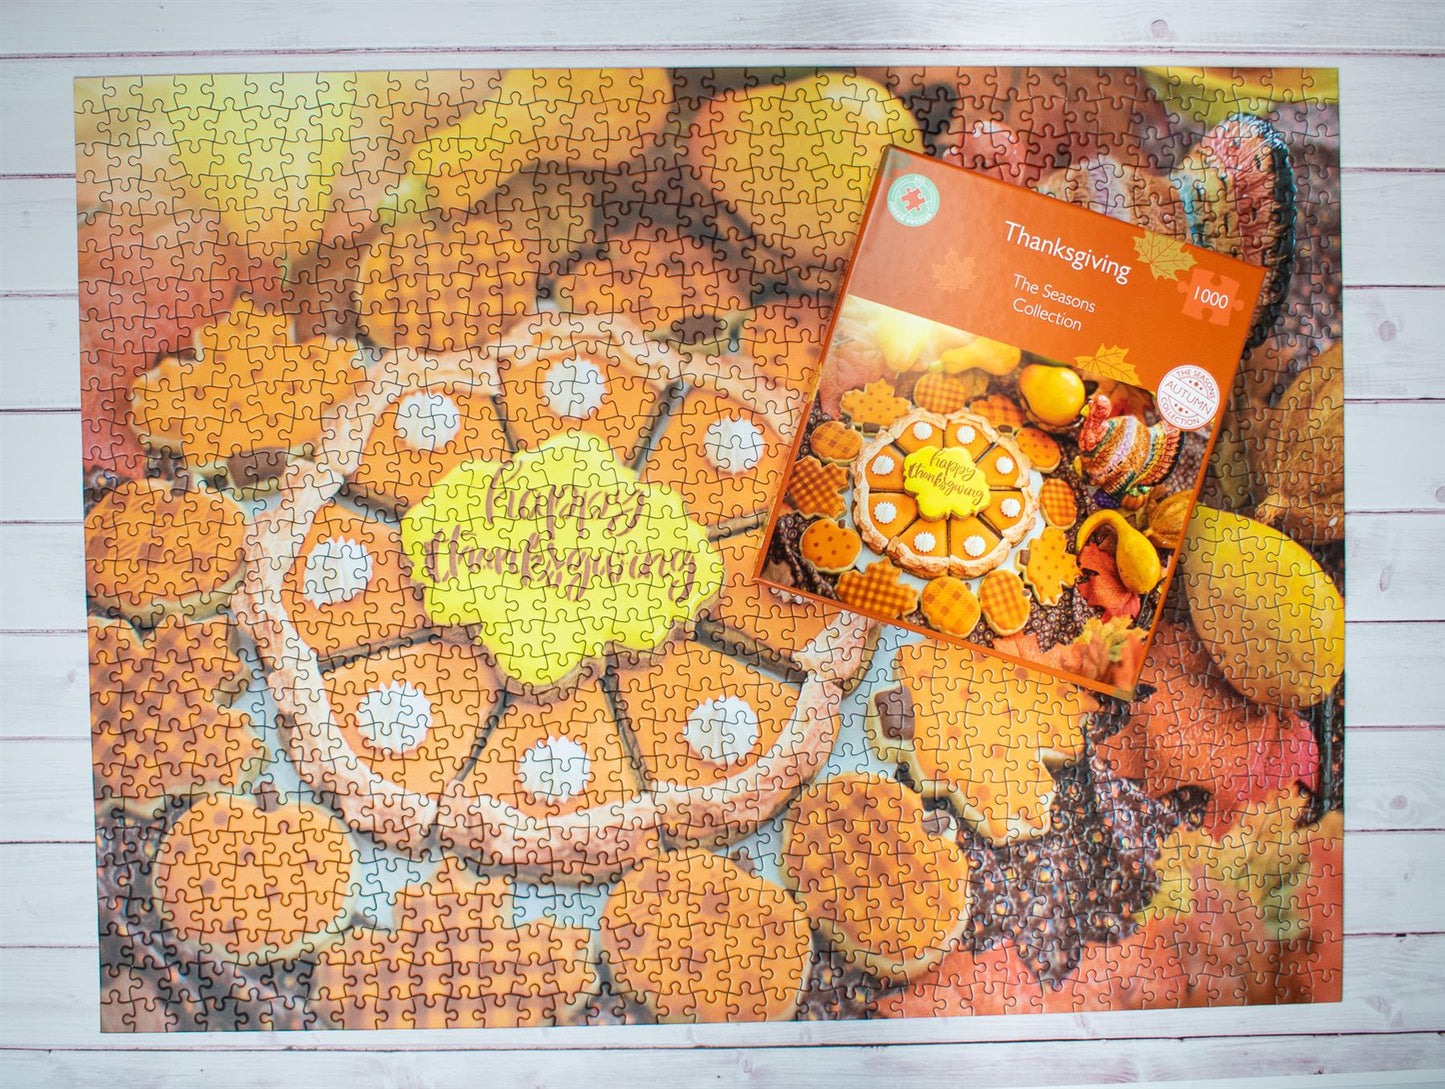 Thanksgiving 1000 Piece Jigsaw Puzzle